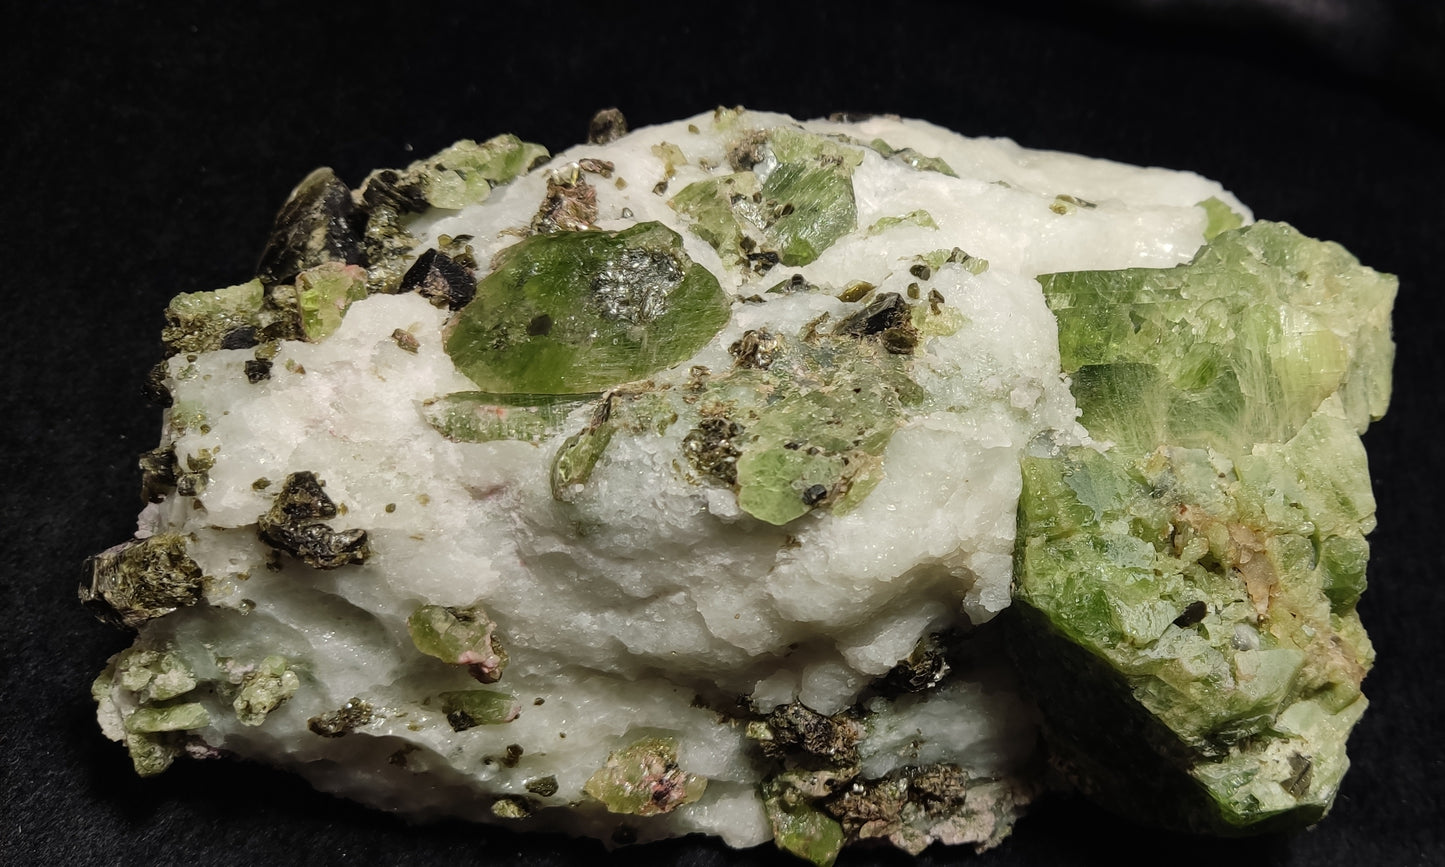 Large Green diopside crystals on matrix with mica 2400 grams